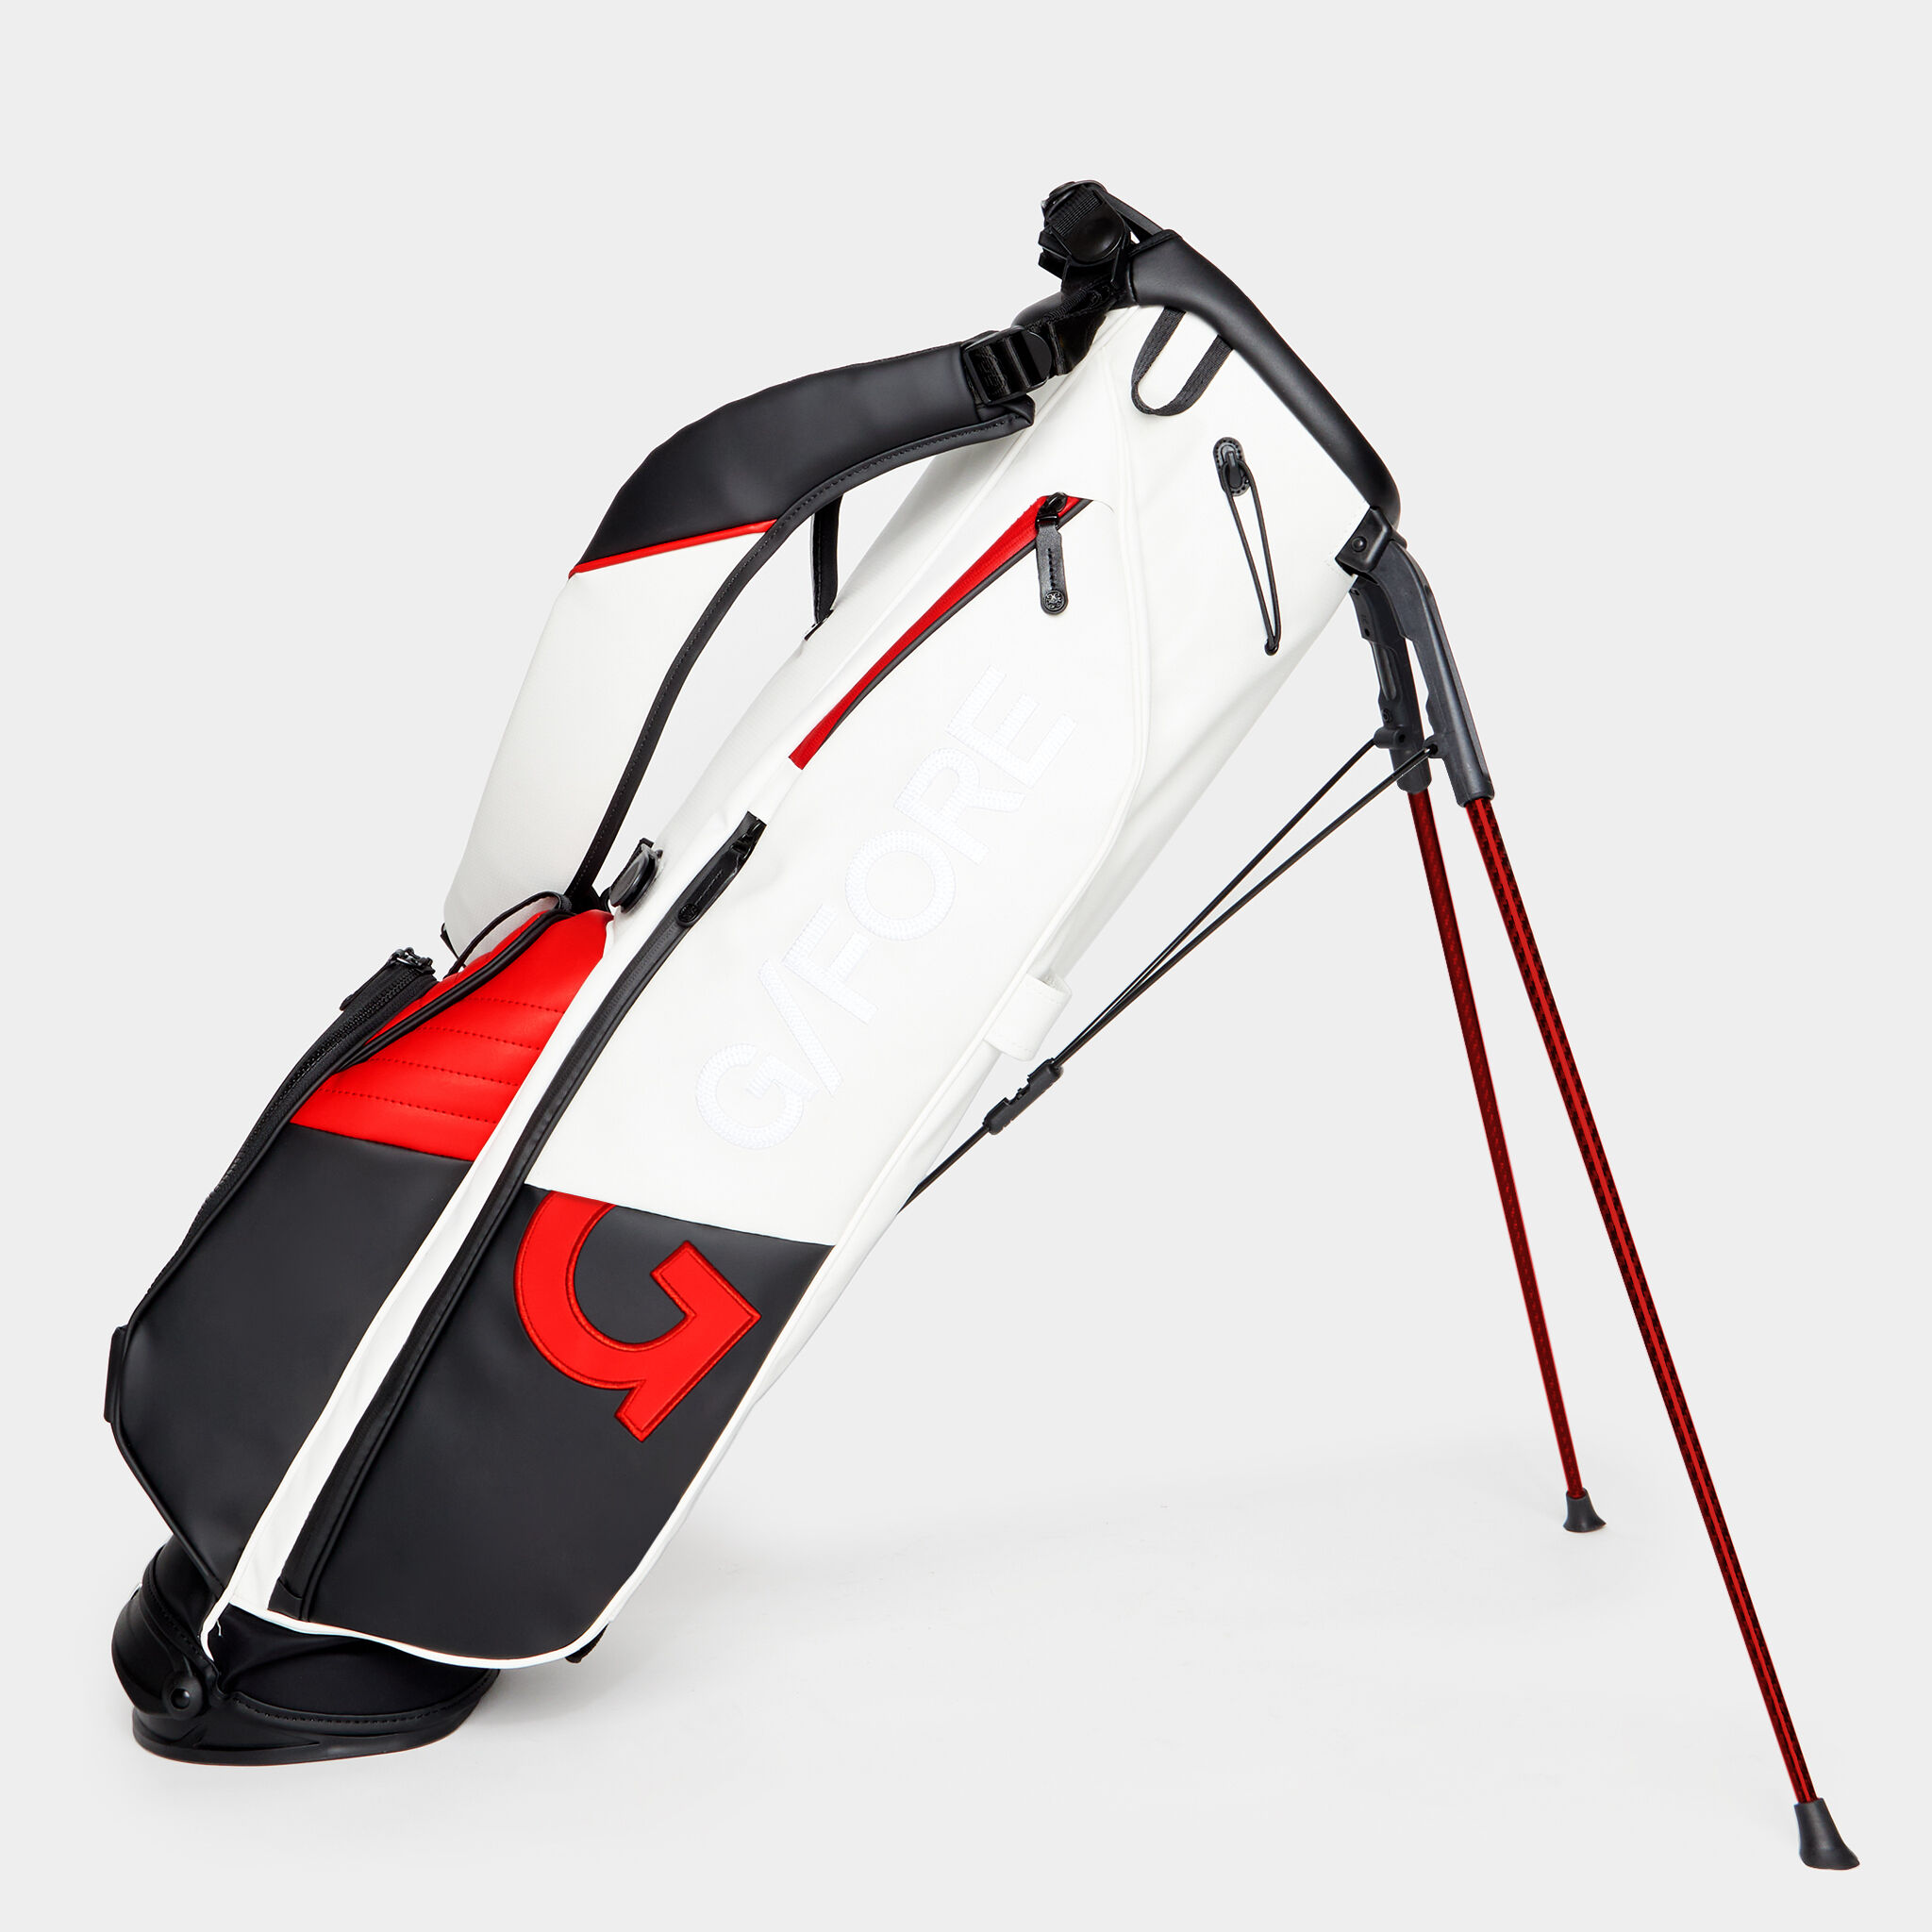 SUNDAY II CARRY GOLF BAG | GOLF BAGS FOR MEN AND WOMEN | G/FORE